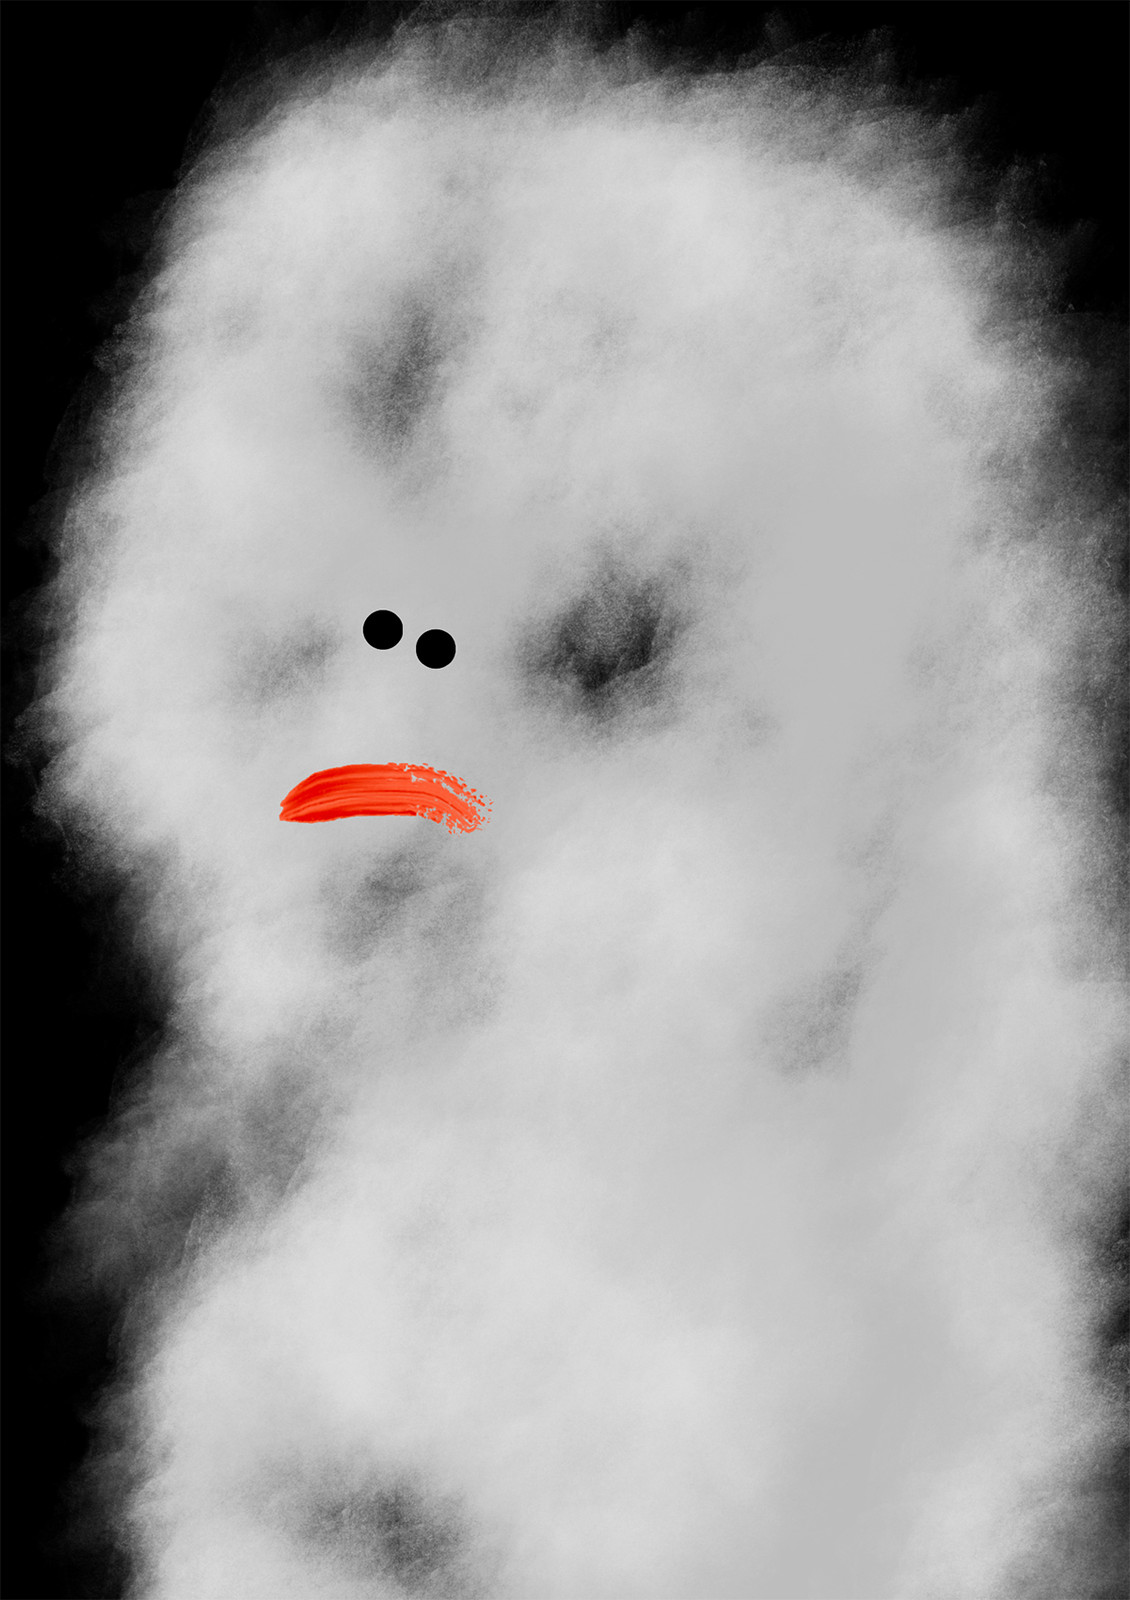 “Sad gas” from “Funny pictures” series, digital painting, 2020